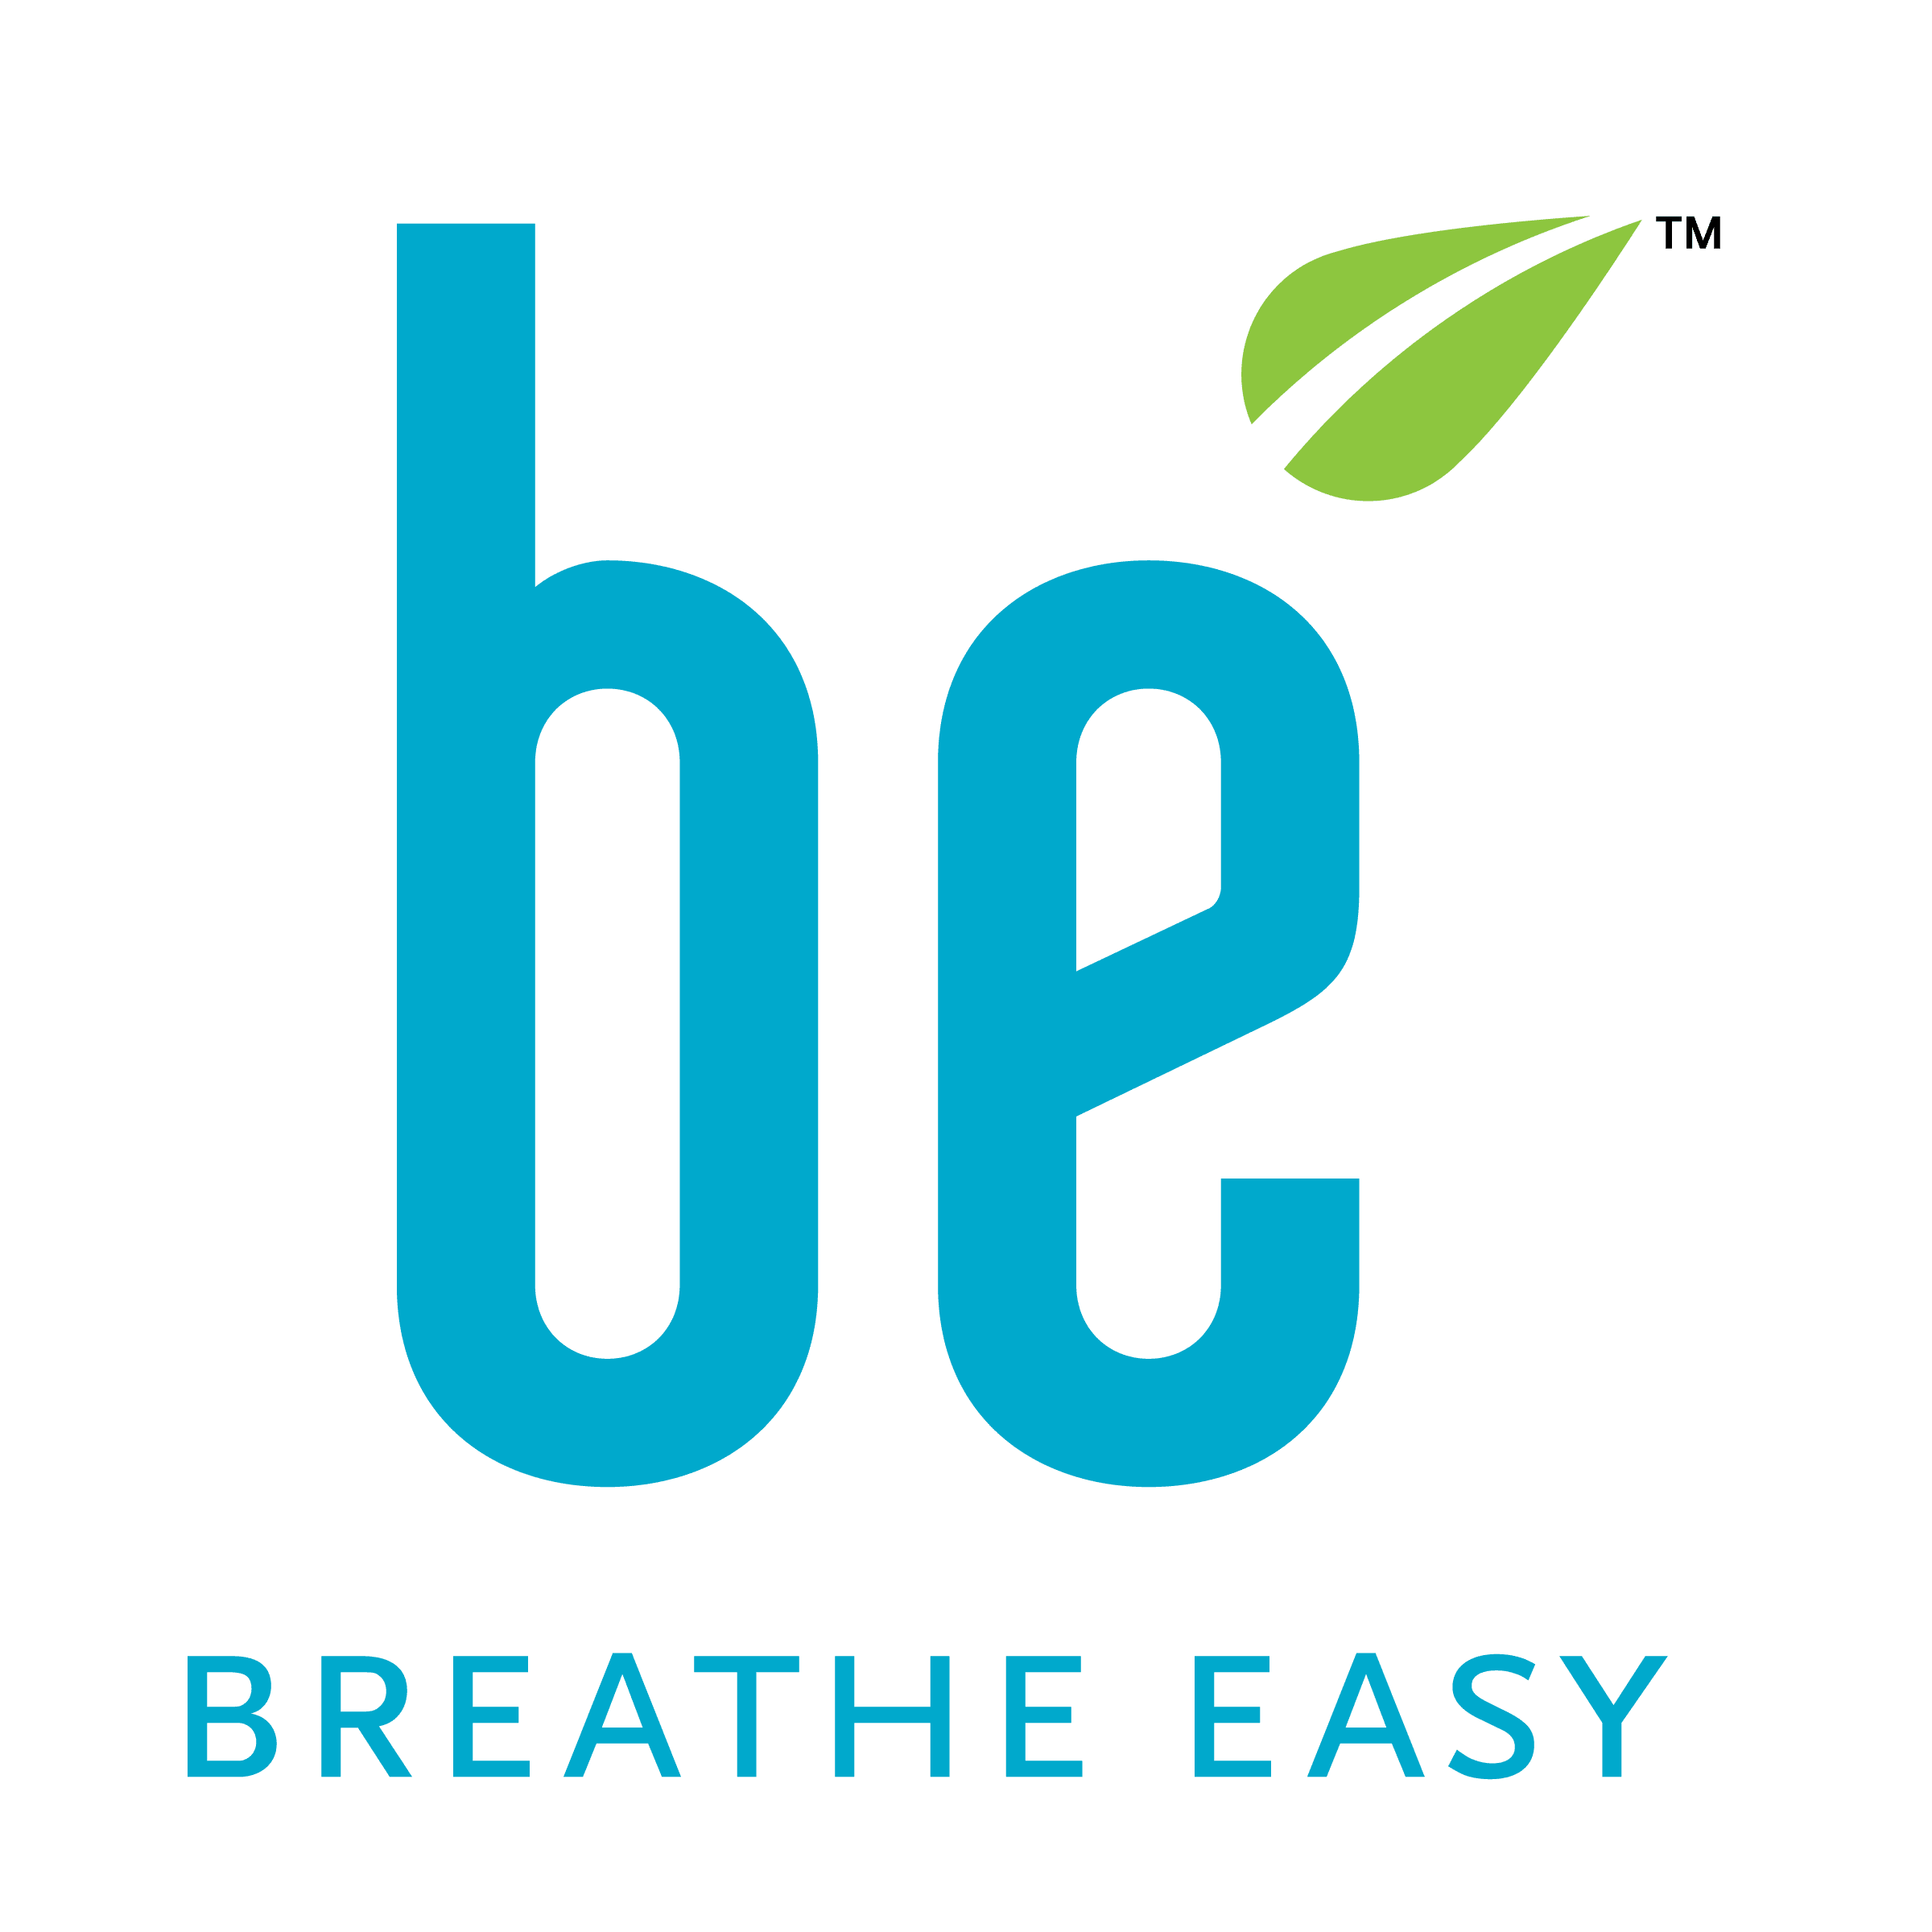 Get Advisory on Air Quality products by BreatheEasy